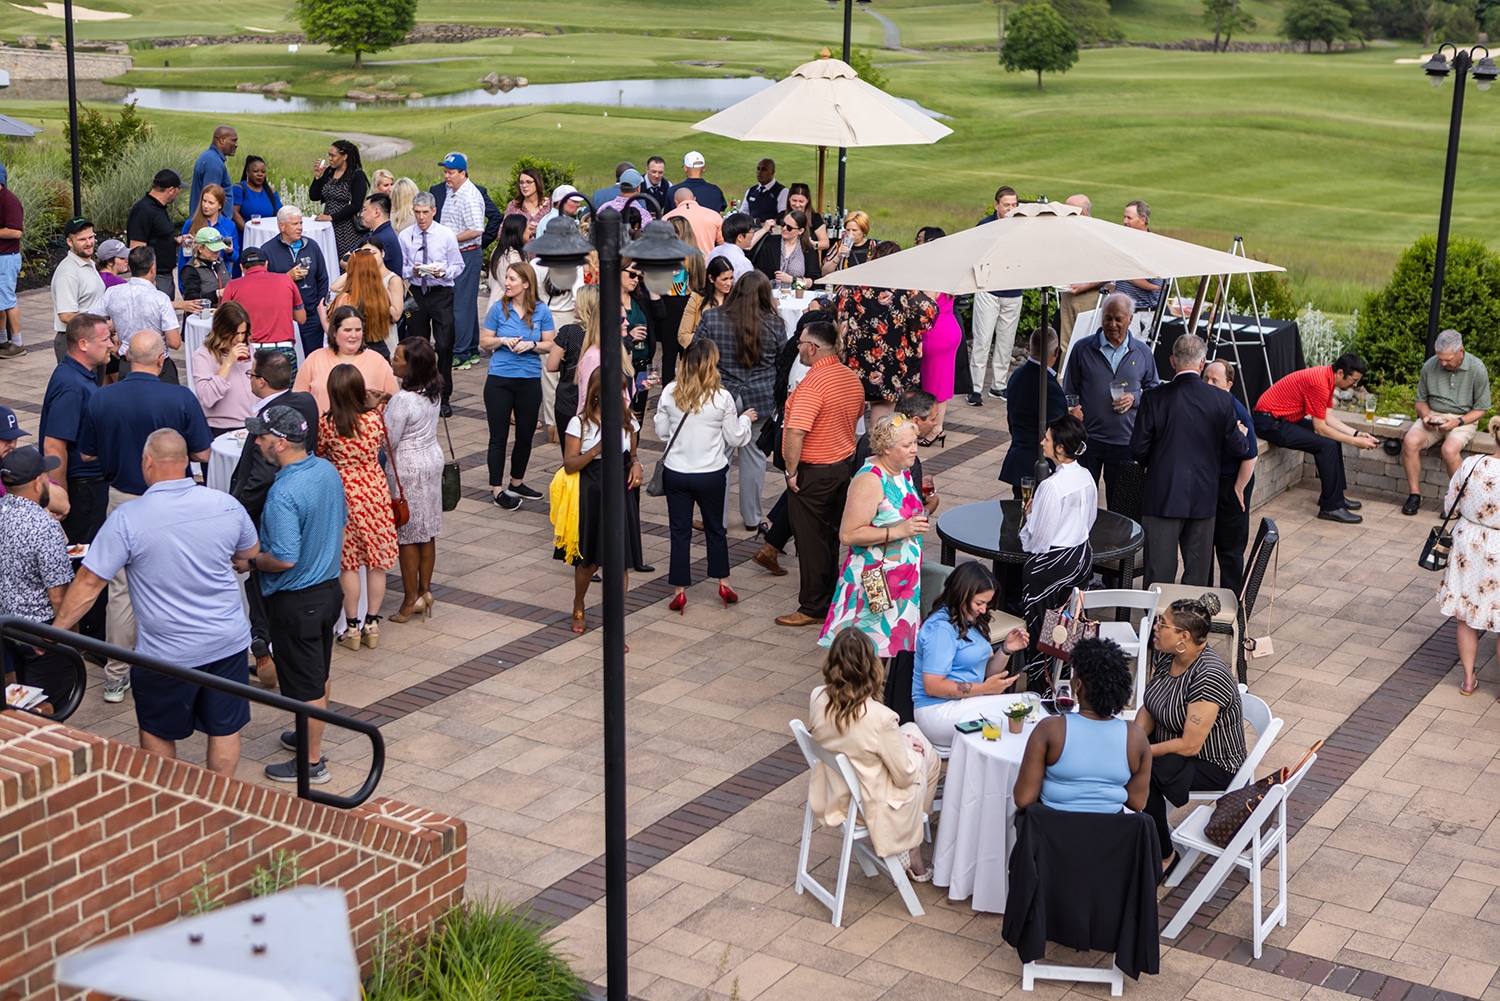 On Monday, May 22, 2023, Community Options, a national nonprofit dedicated to providing housing and employment support to people with intellectual and developmental disabilities, hosted its annual iMatter Golf Classic at Union League Liberty Hill Golf Club in Lafayette Hill, PA.